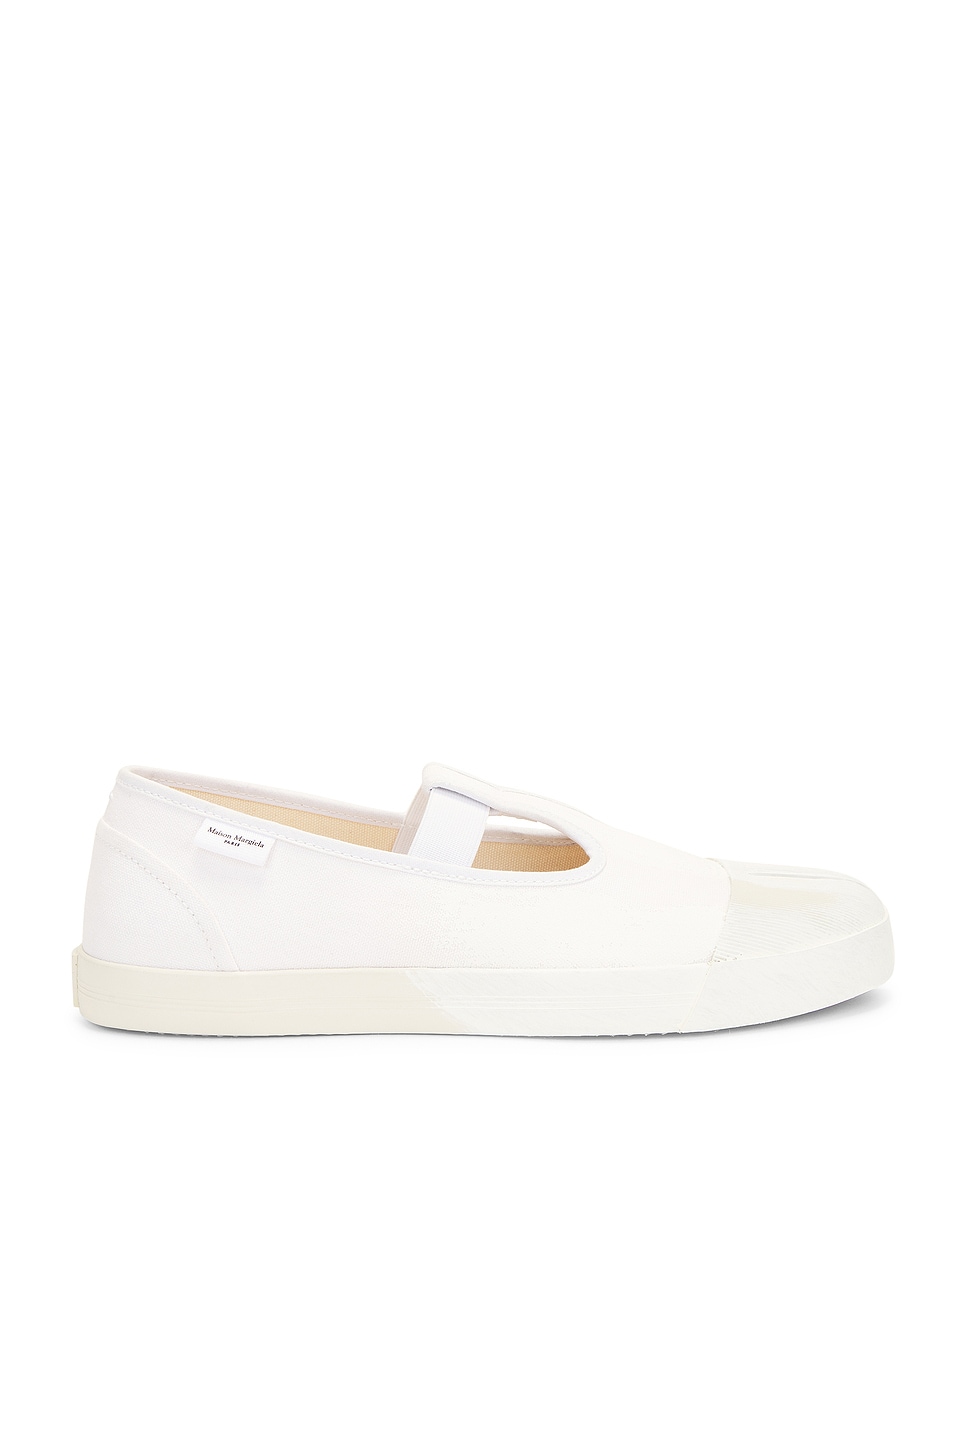 Image 1 of Maison Margiela On The Deck Tabi Mary Jane Sneaker in White & Mat Bianchetto